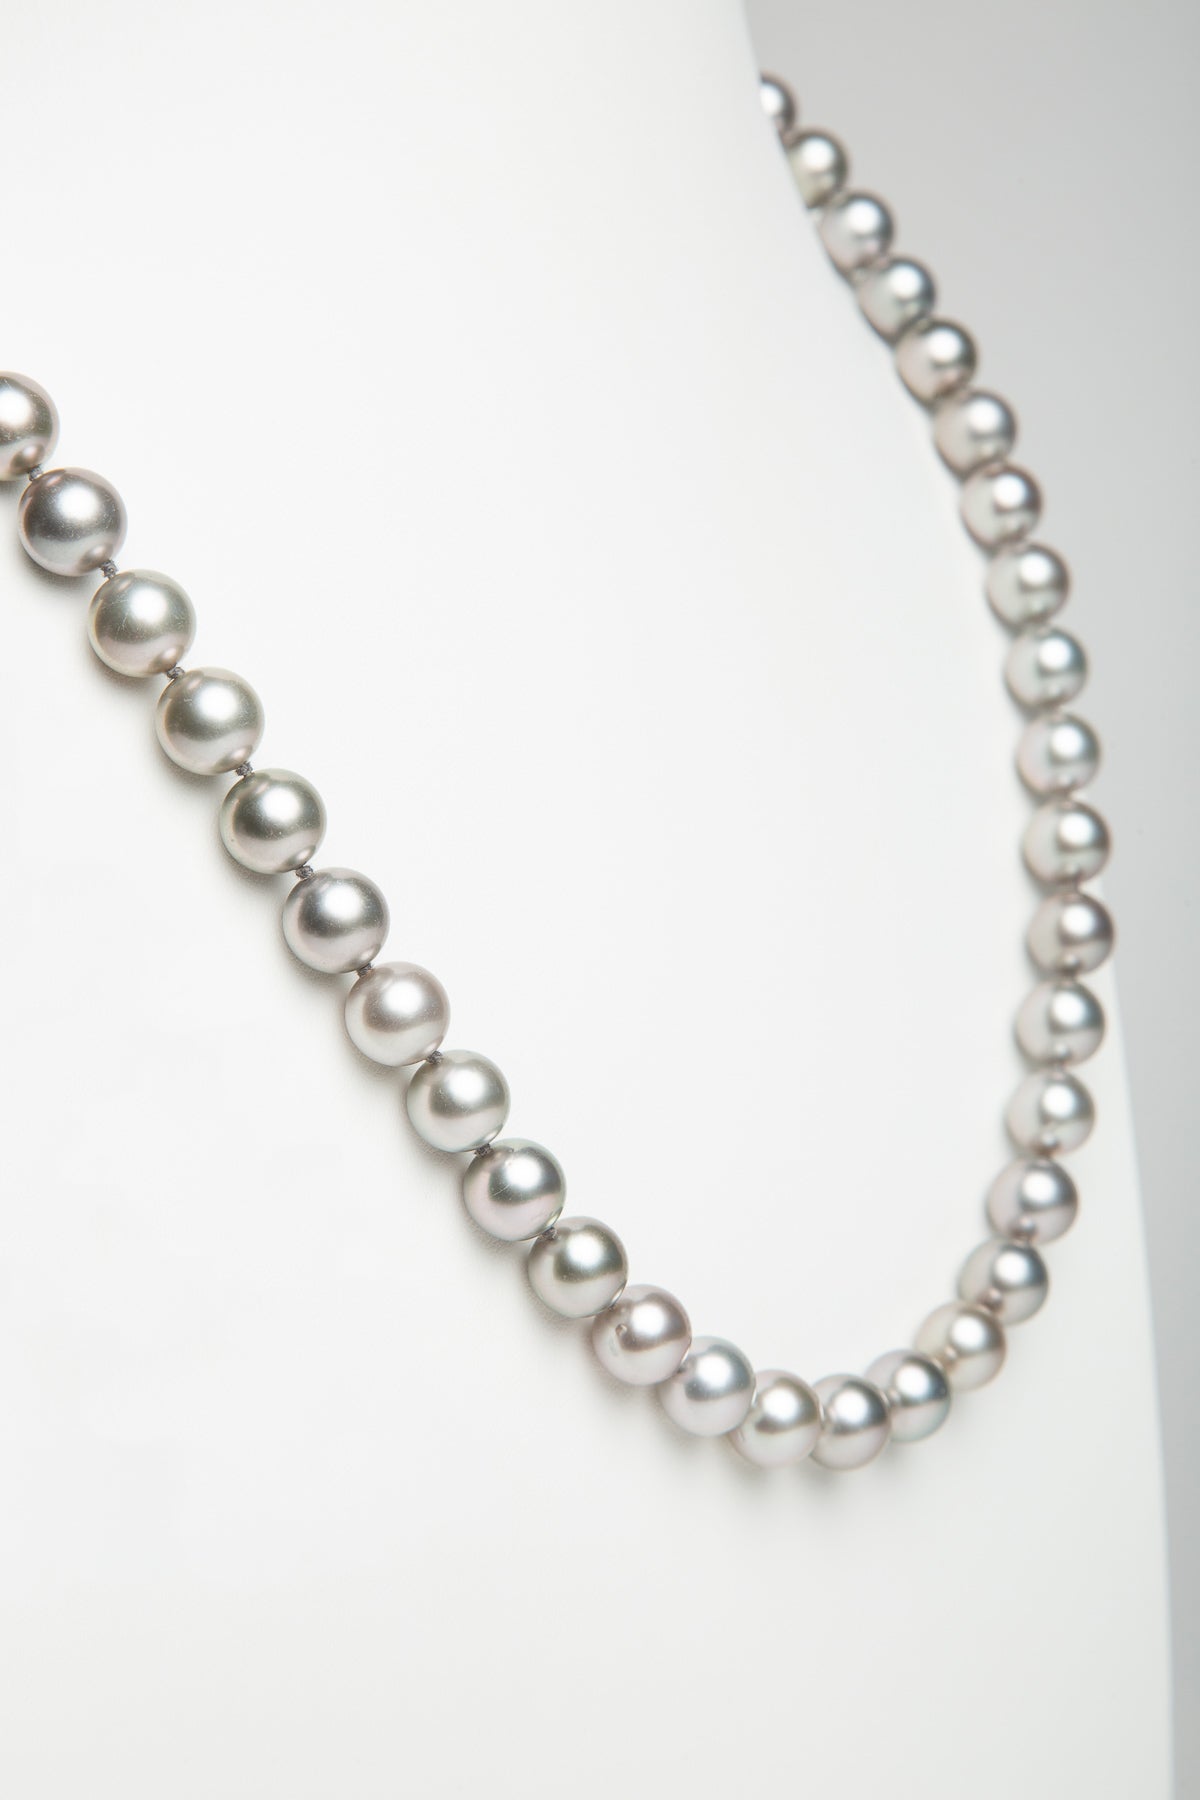 MAXFIELD PRIVATE COLLECTION | 12MM GREY PEARL NECKLACE